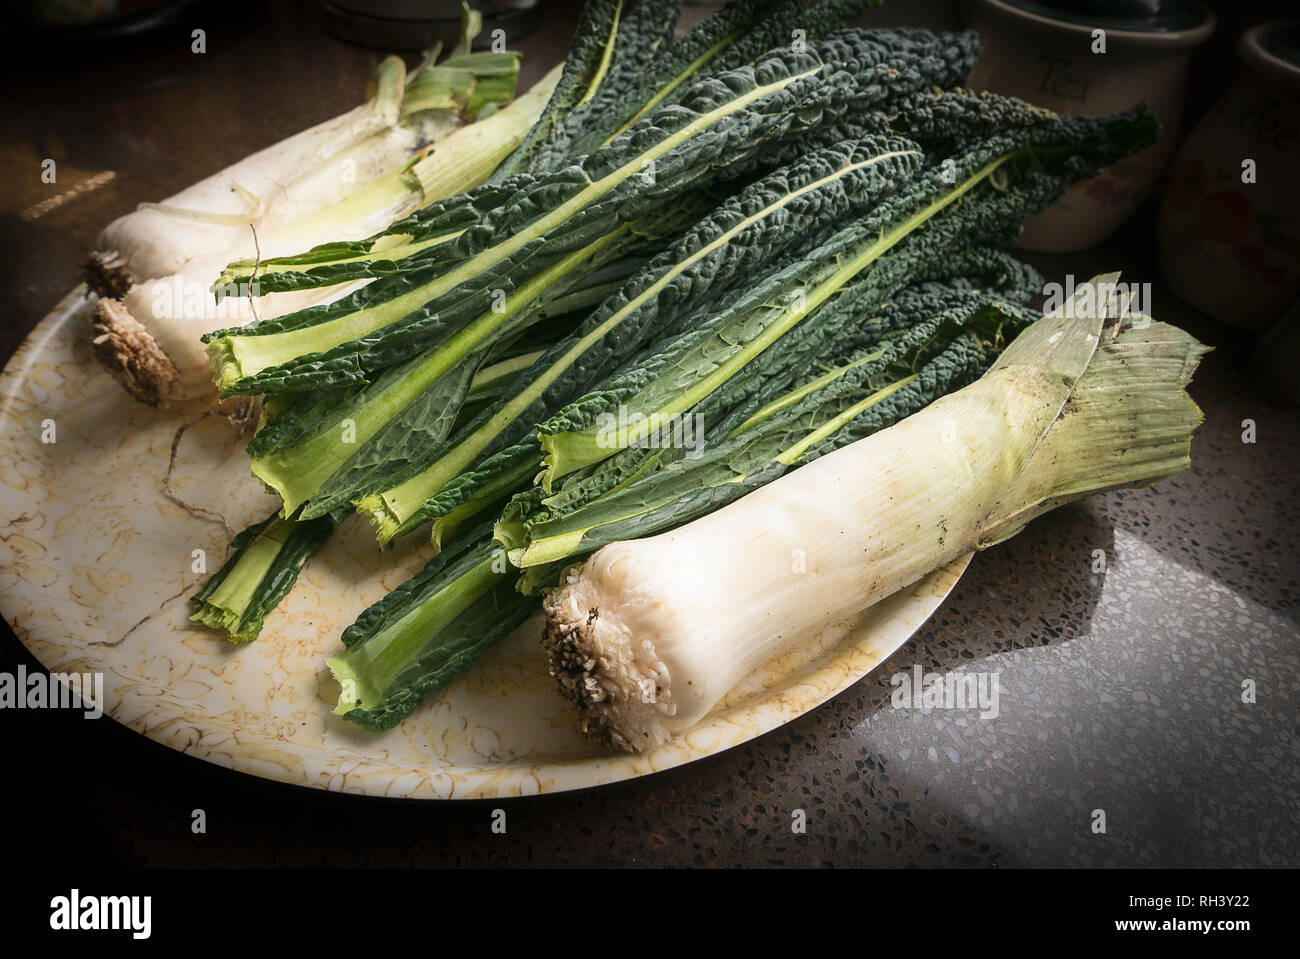 Freshly picked and trimmed home-grown vegetaables including Black Tuscan kale and leeks Stock Photo